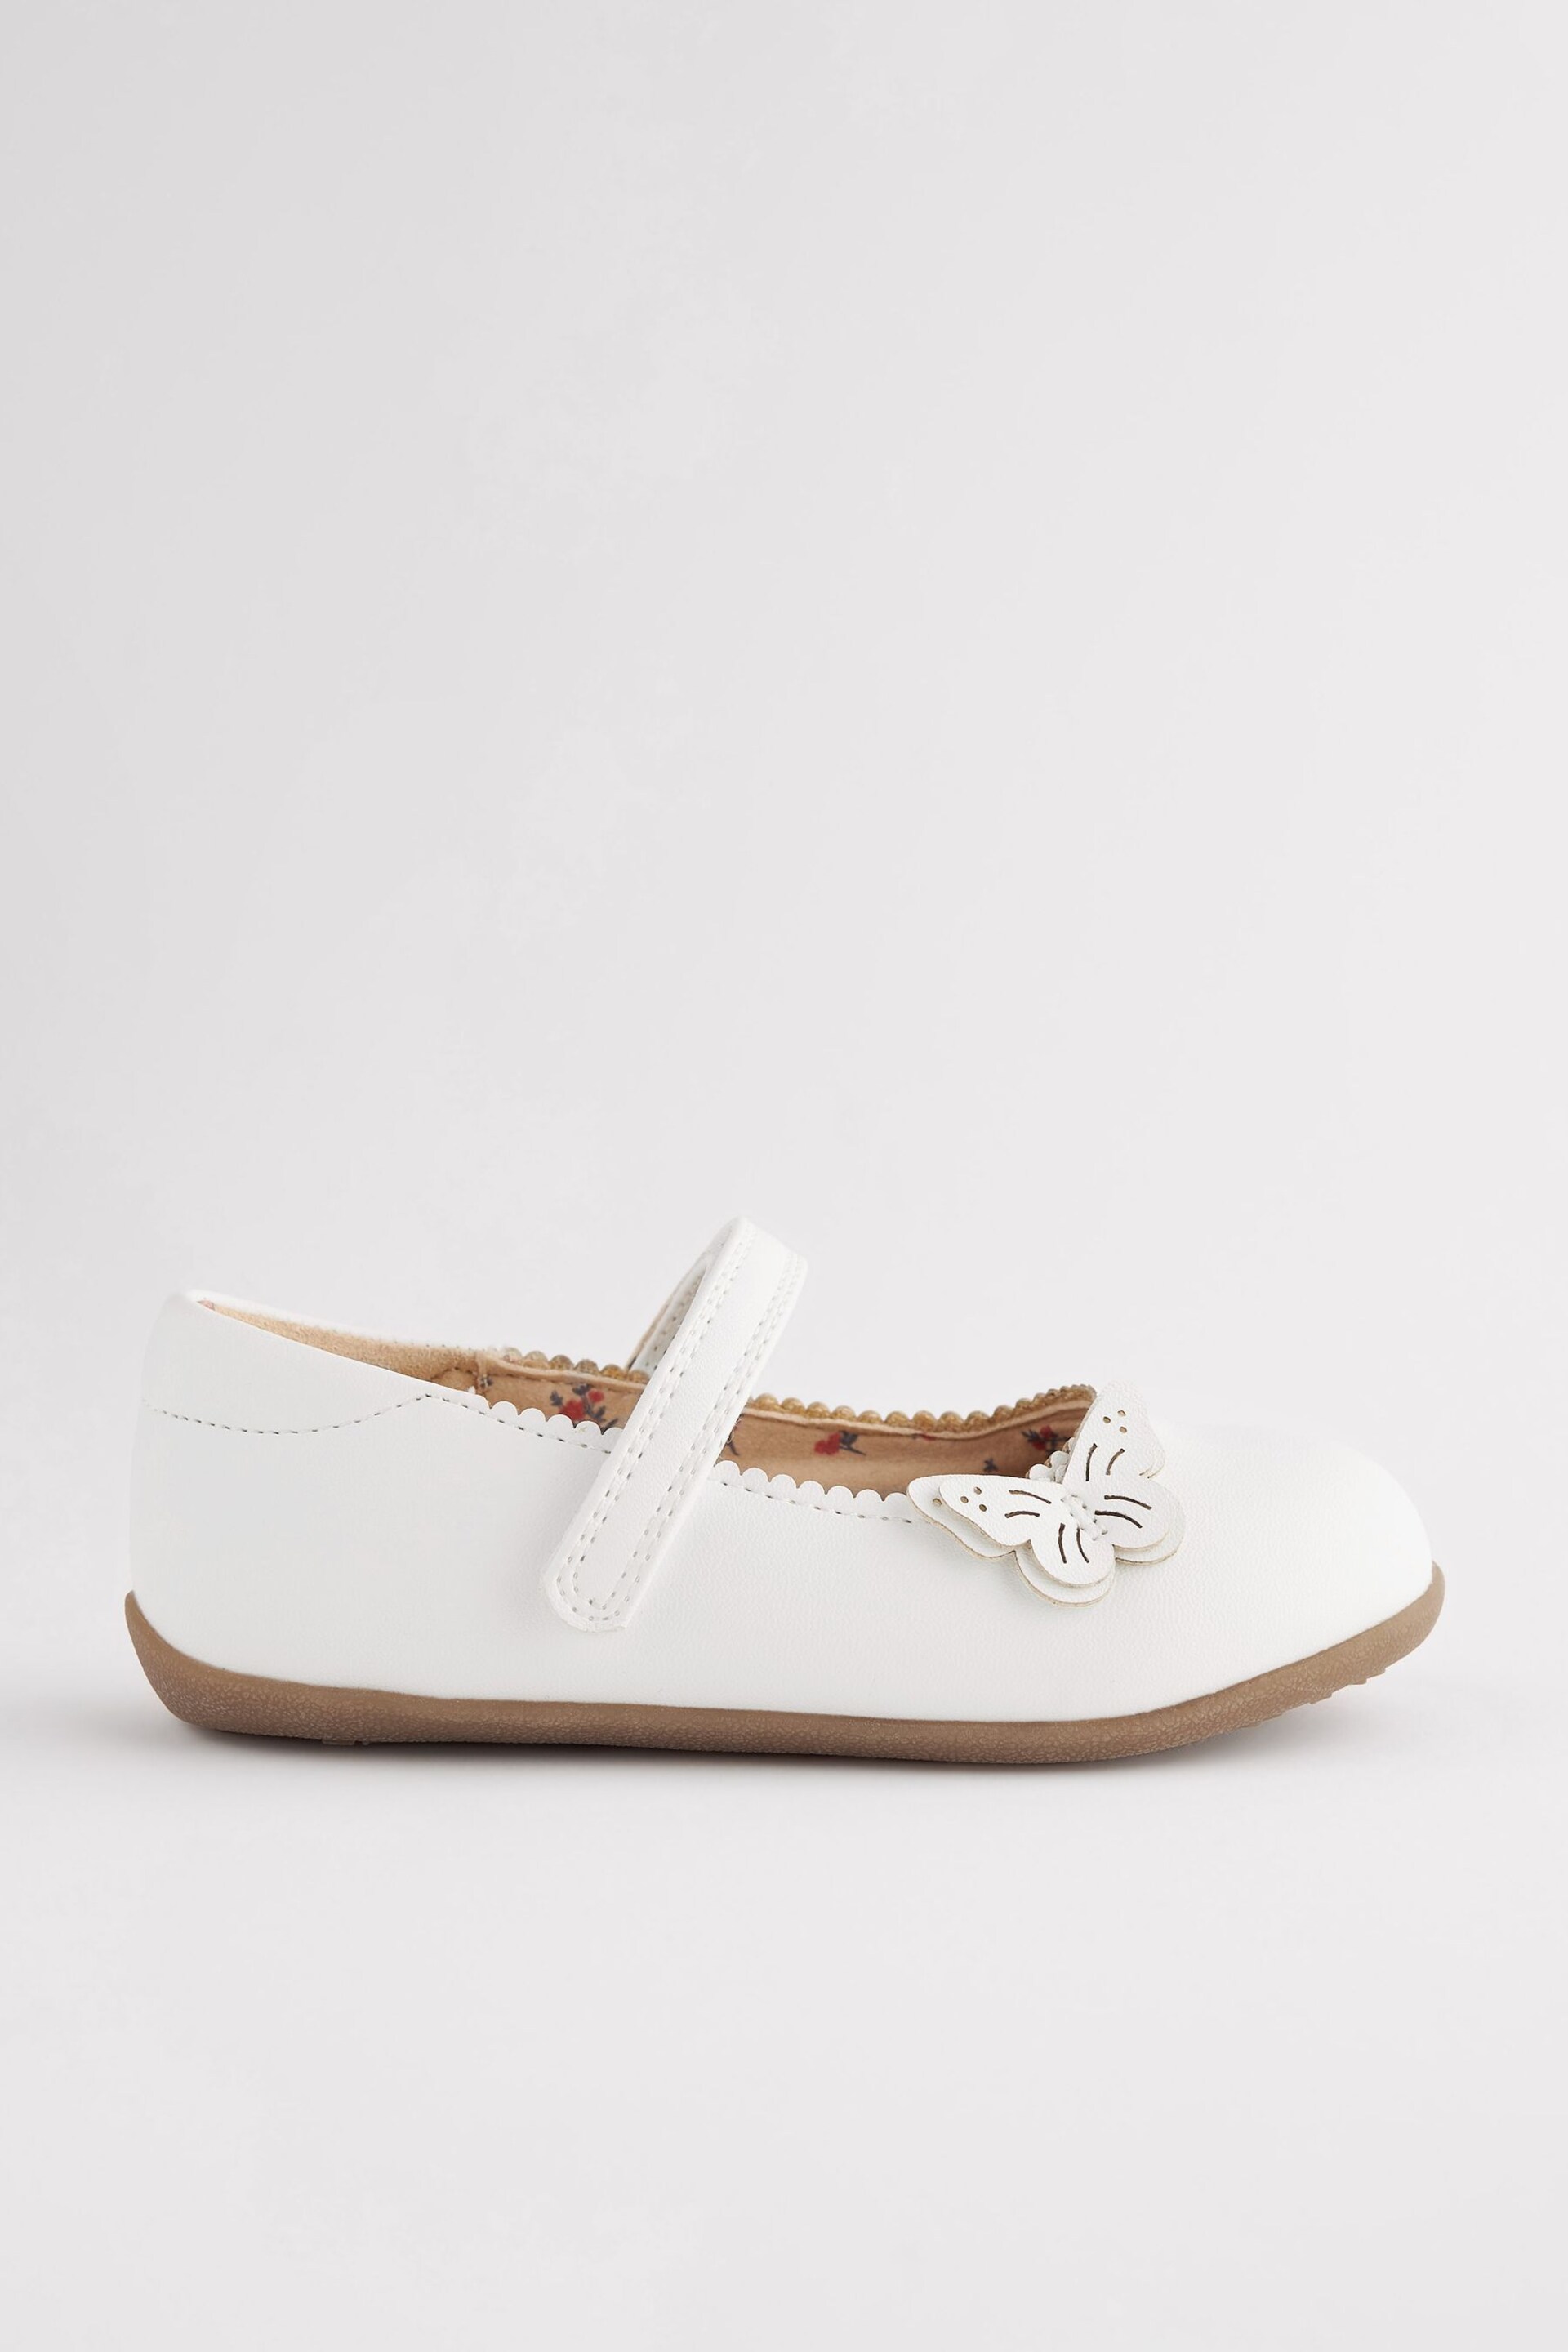 White Wide Fit (G) Butterfly Mary Jane Shoes - Image 2 of 5